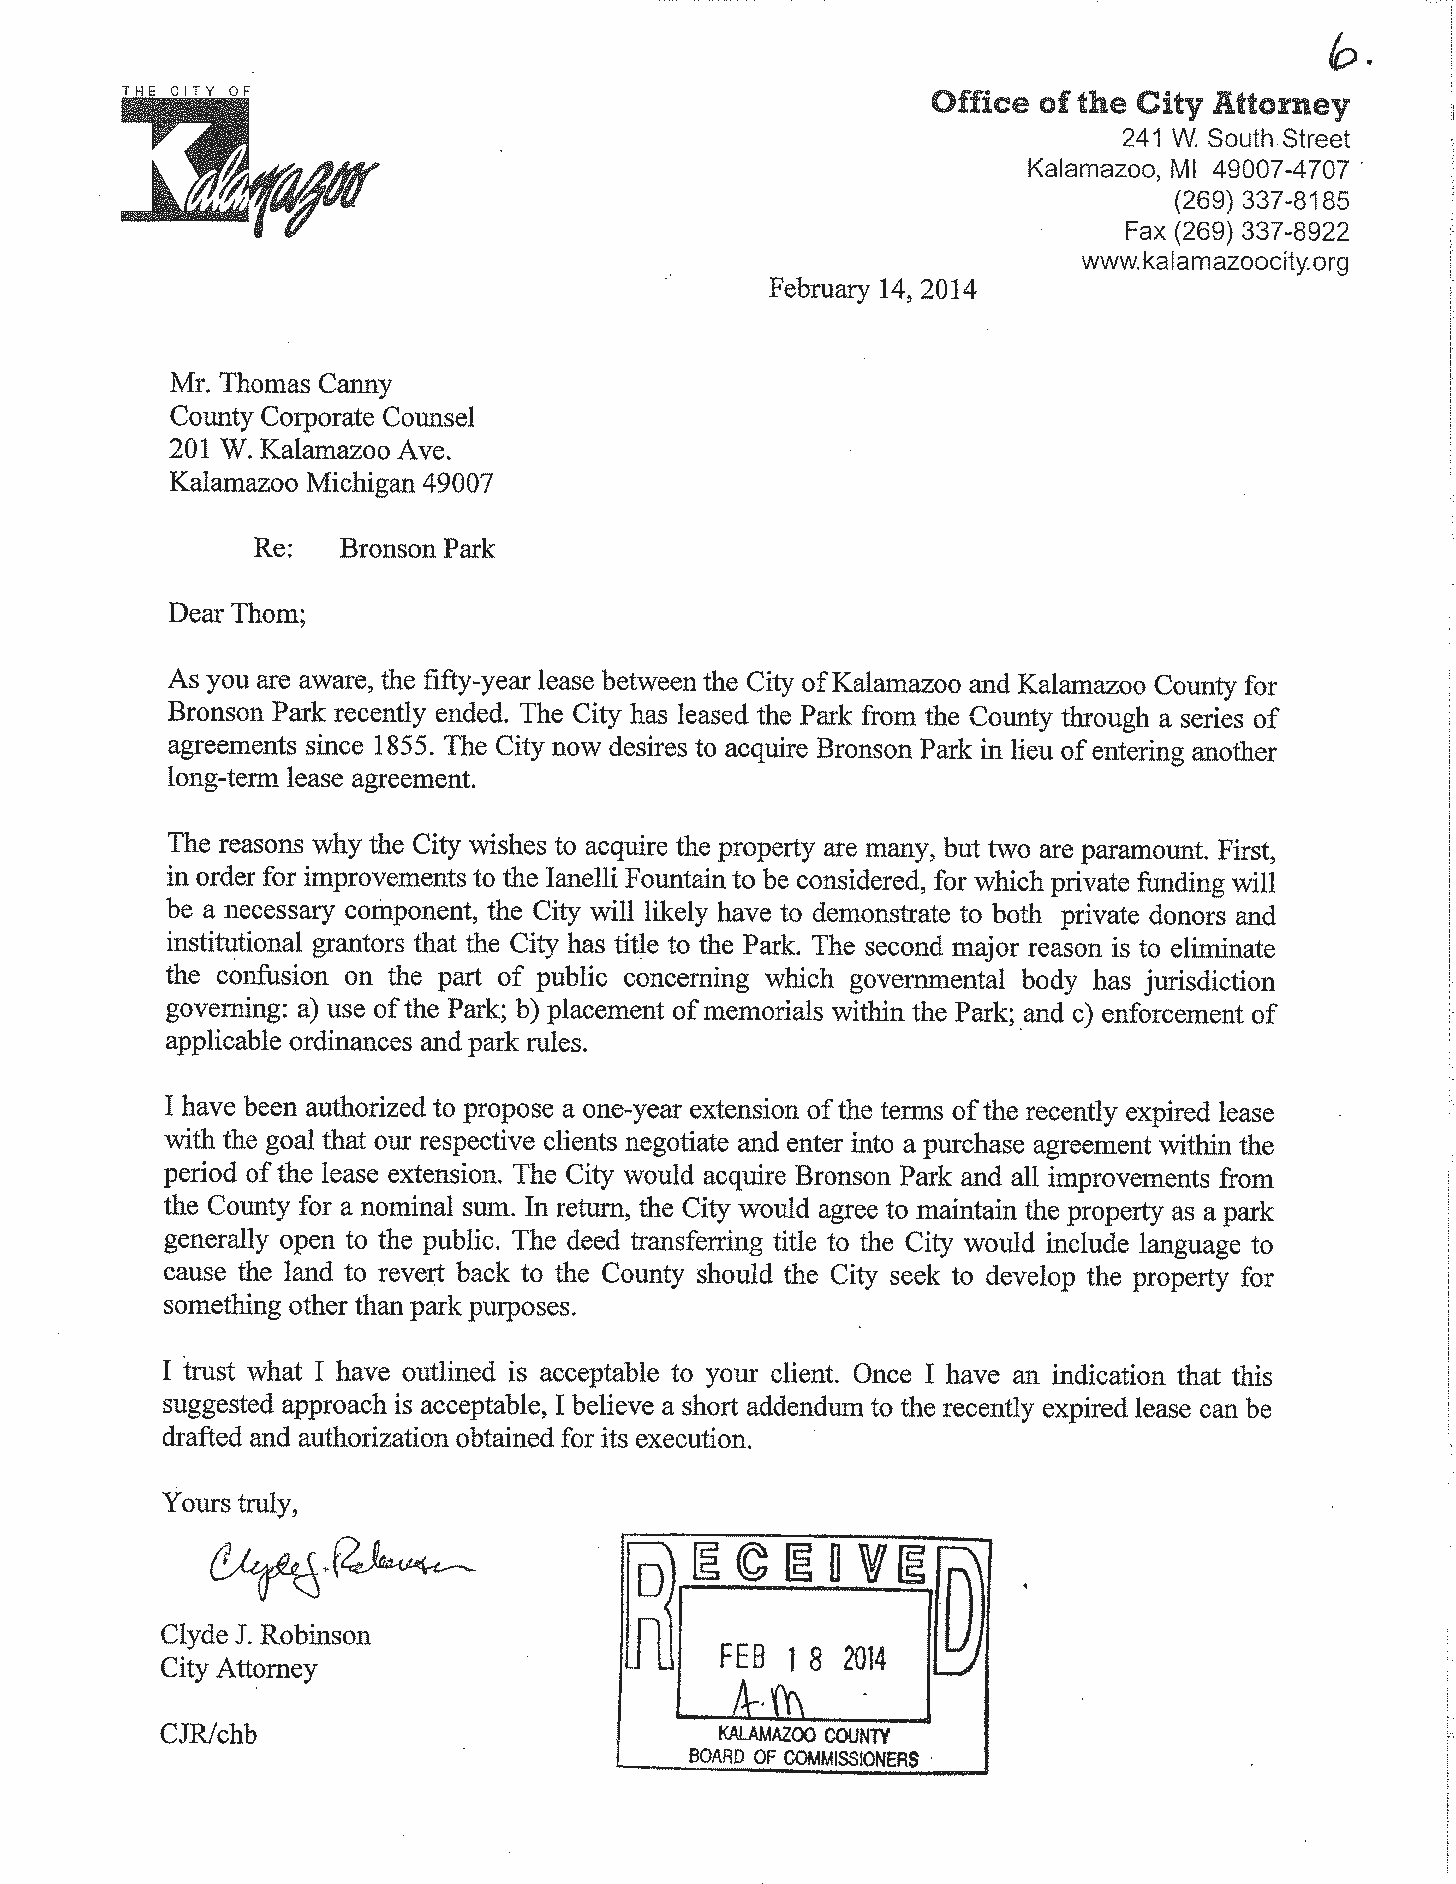 February 14, 2014 letter from Kalamazoo City Attorney Clyde Robinson to Kalamazoo County Corporate Counsel Tom Canney regarding purchase of Bronson Park.